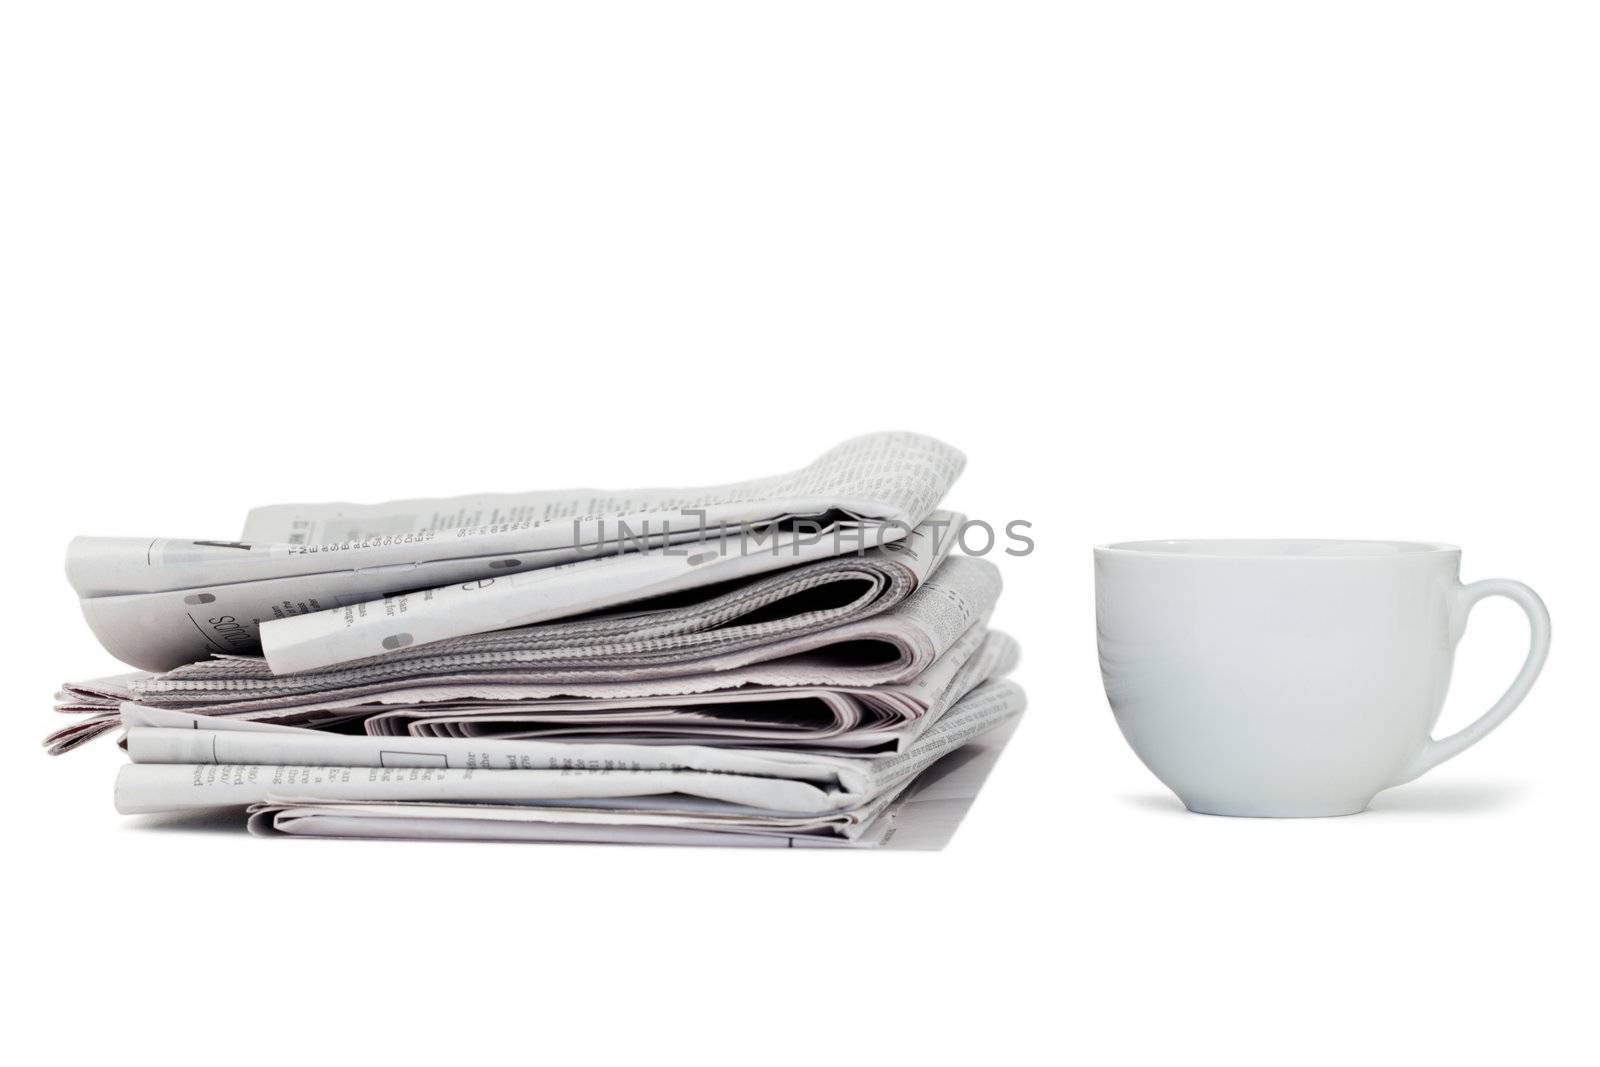 Newspapers and cup of tea by Wavebreakmedia